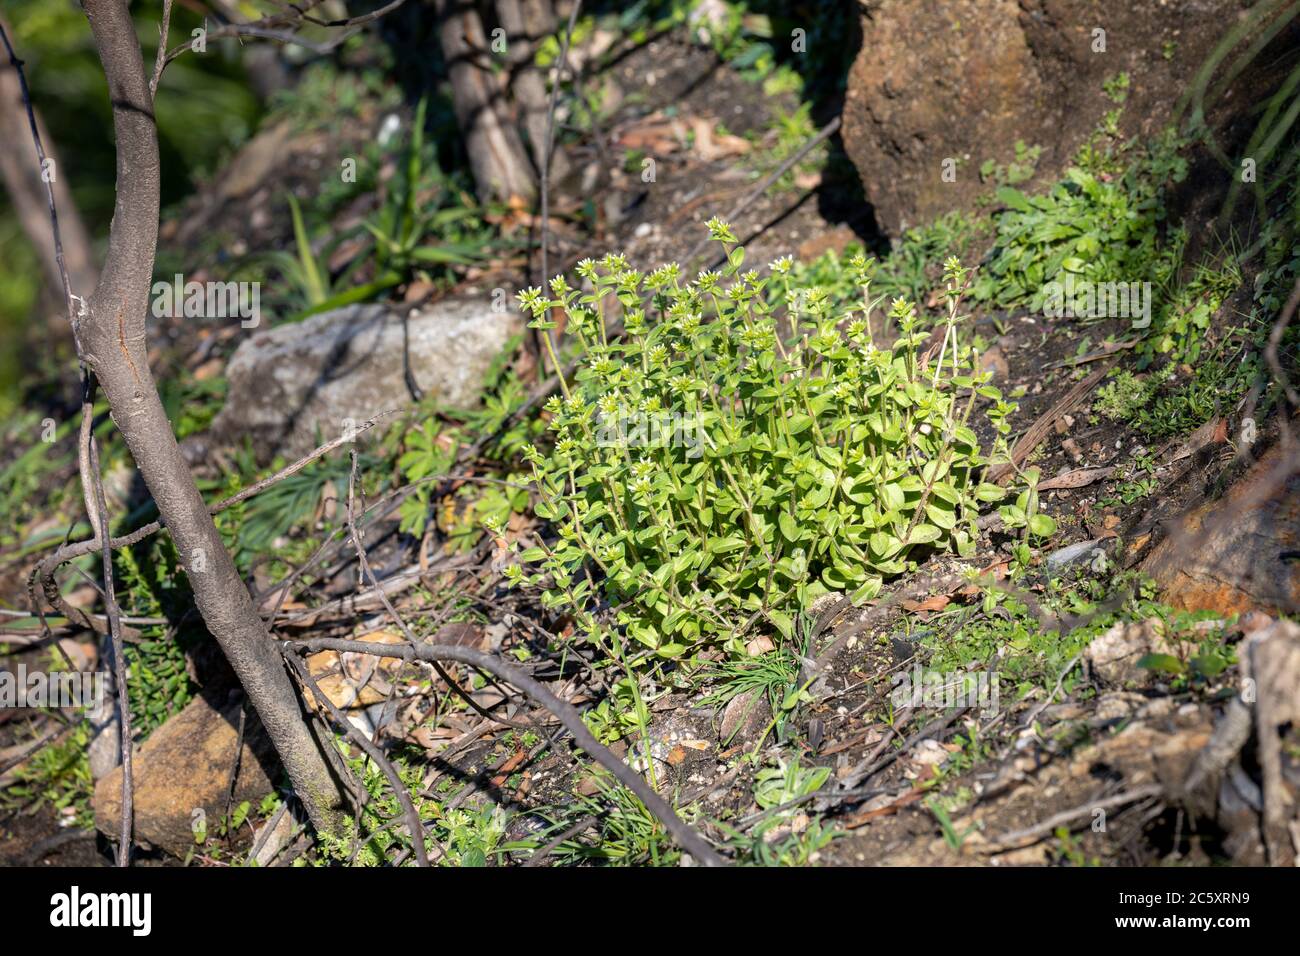 australian bushfires 2020 burnt areas of the Blue mountains national park in NSW, plant life is now regenerating,Australia Stock Photo